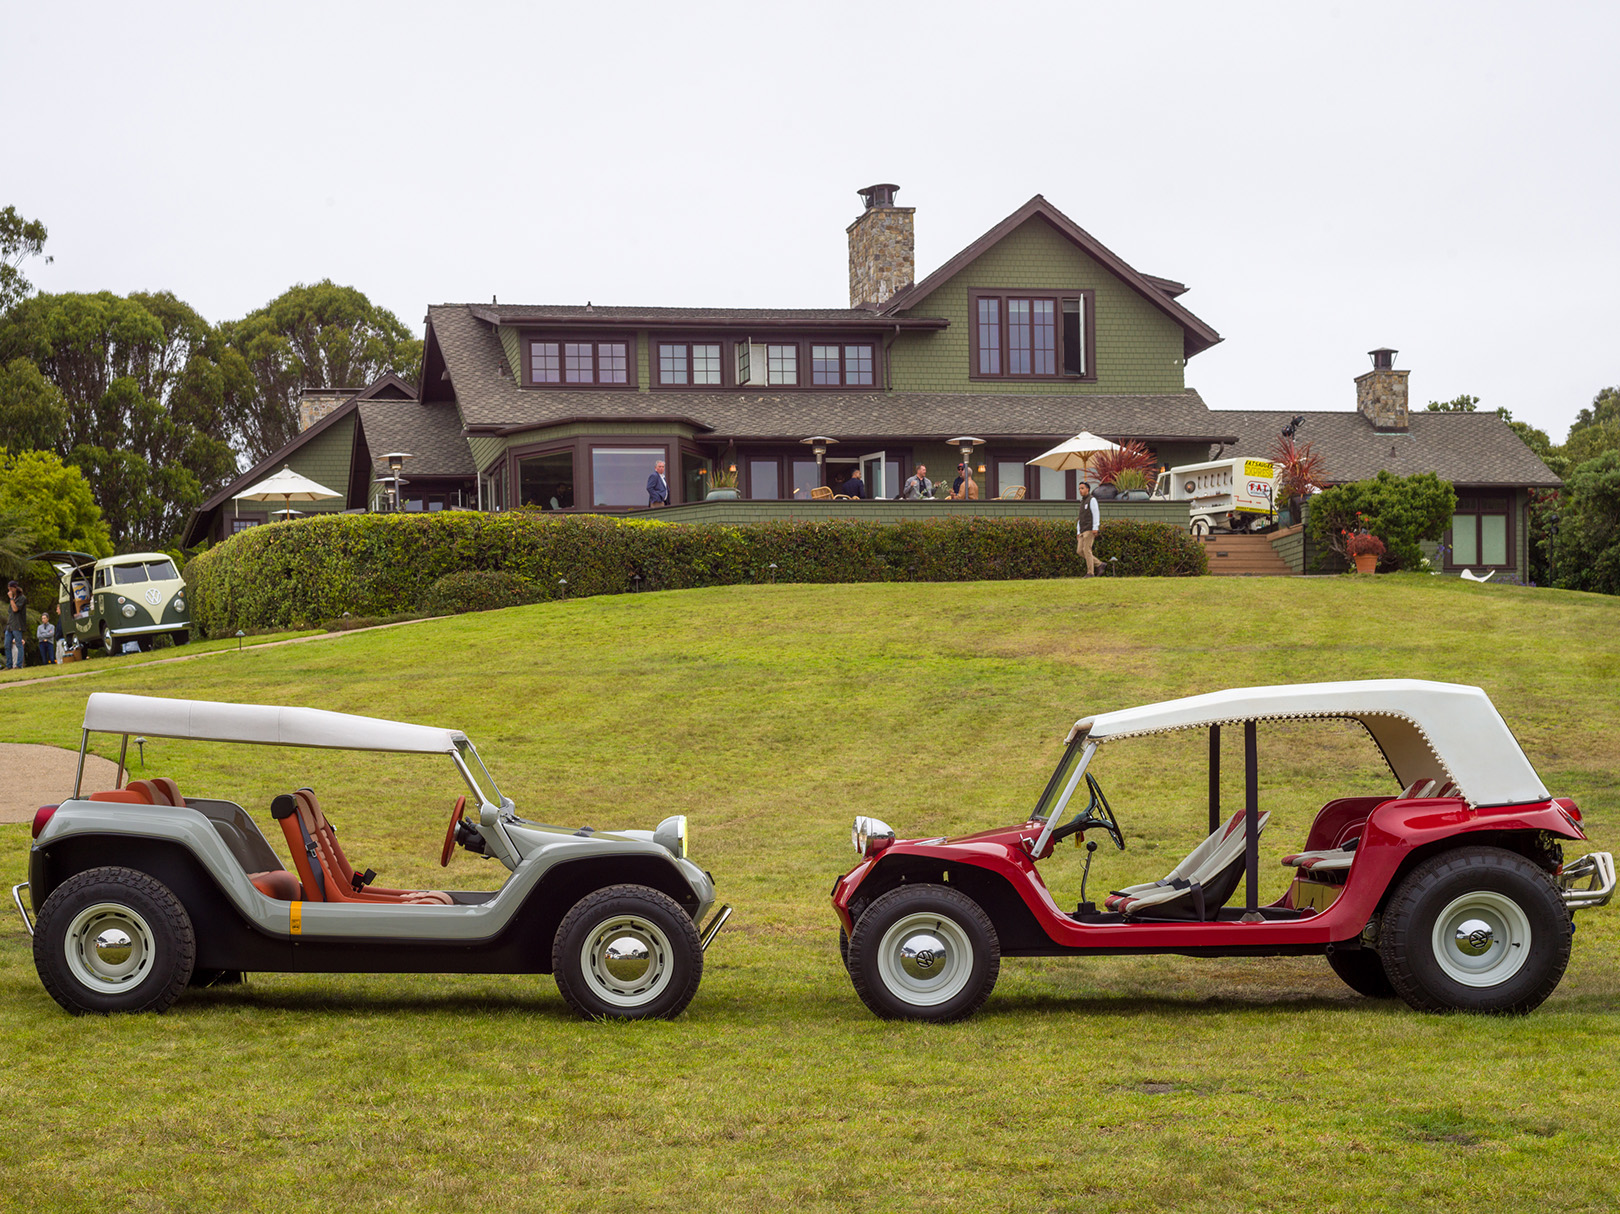 New Manx Resorter NEV (left) is modeled after and faces an original red Meyers Manx Roadster - Meyers Manx Private Gathering on August 17th at the Trousdale House in Monterey, California